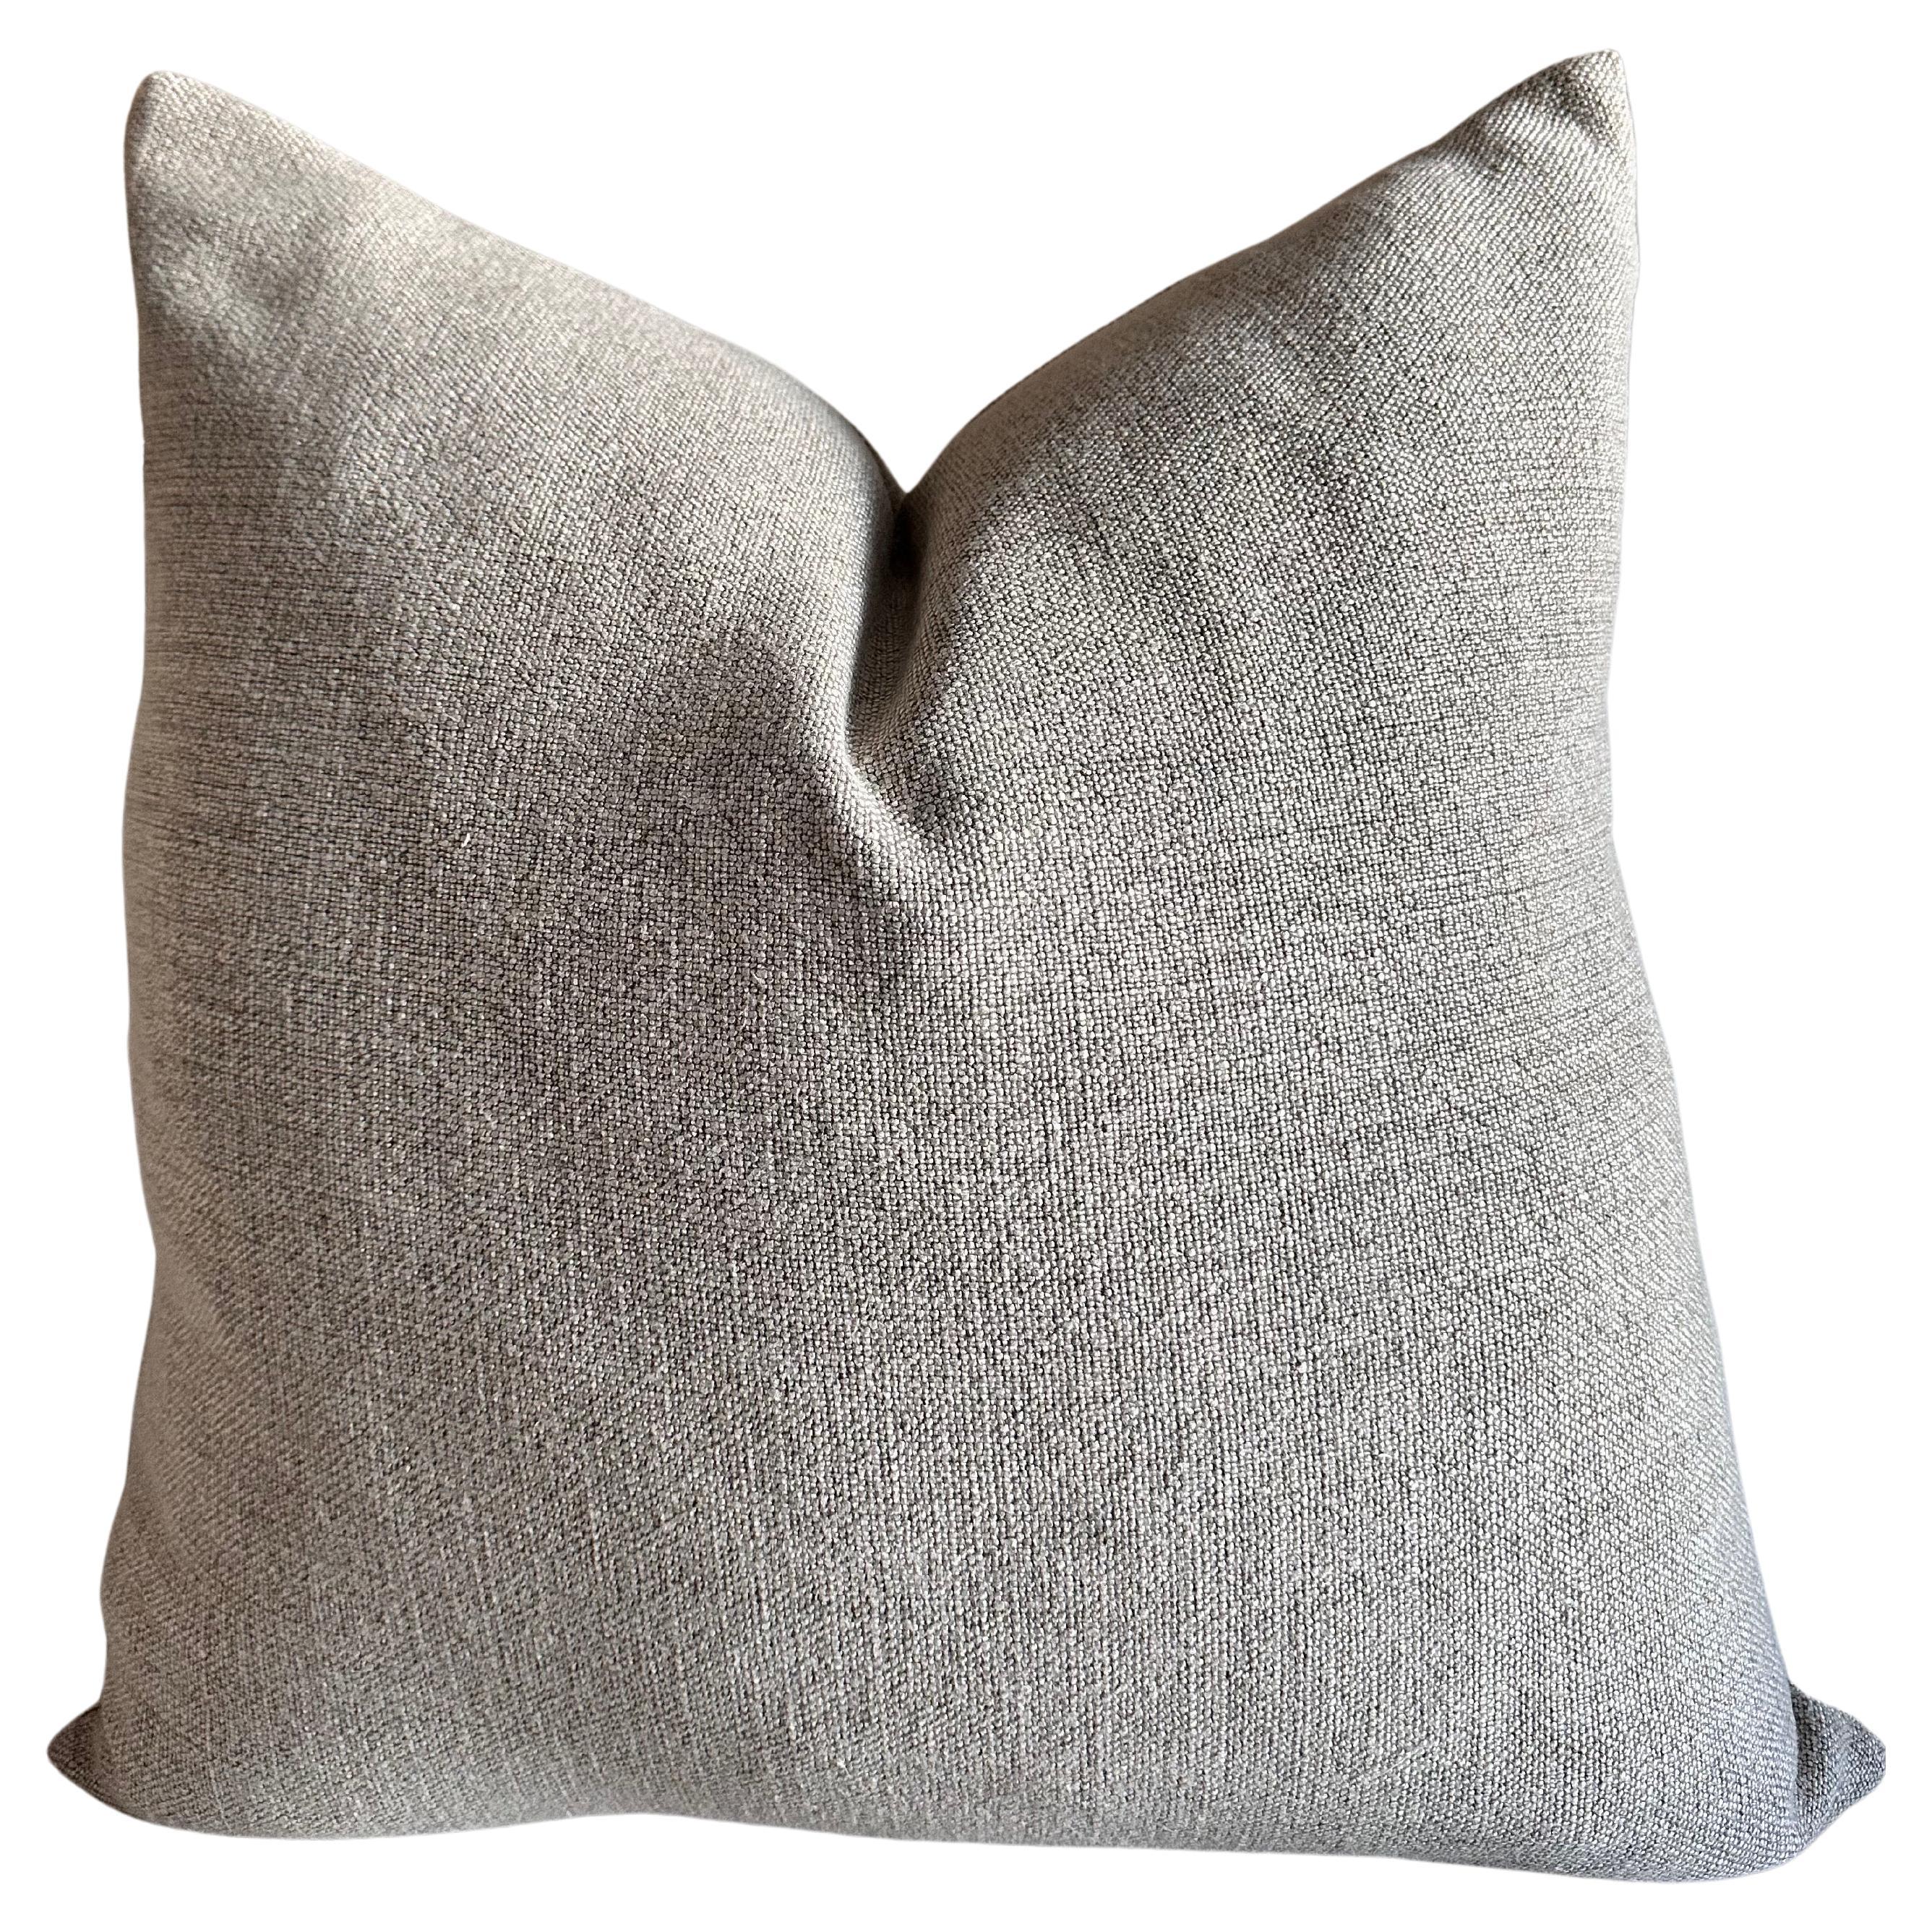 Belgian Linen Pillow with Down Insert in Natural 